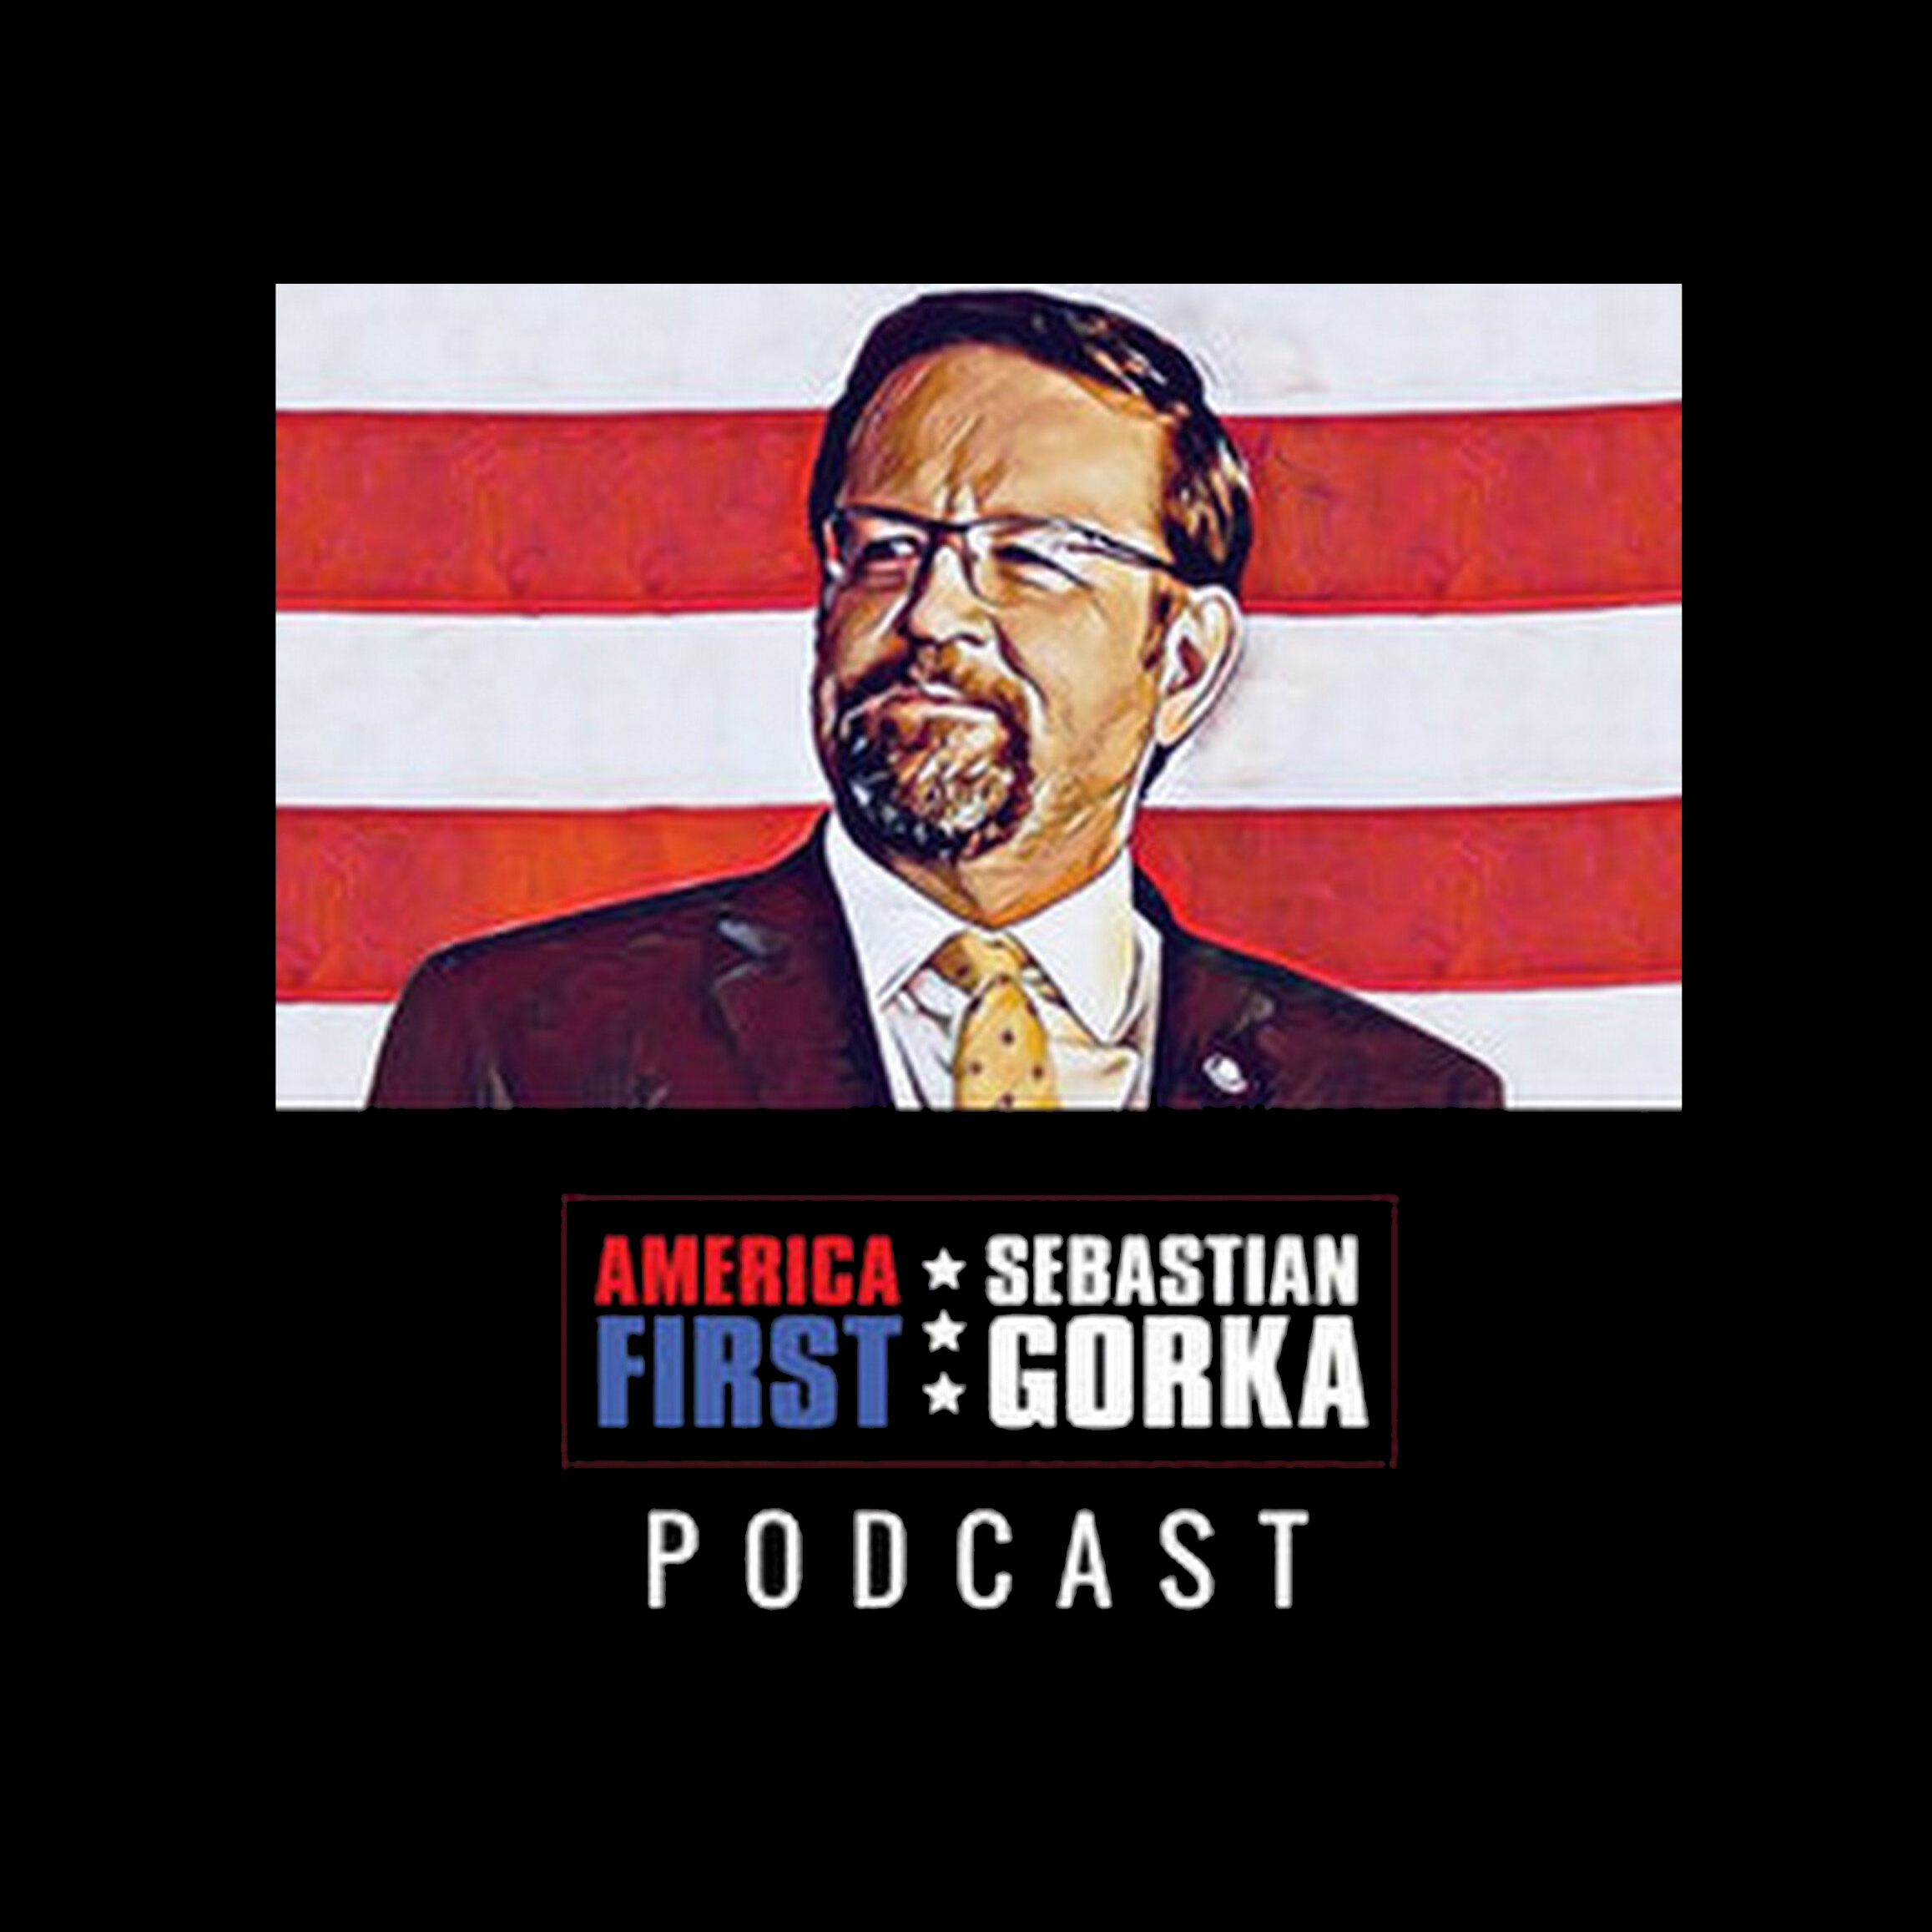 Is Western Civilization finished? Thomas D. Williams with Sebastian Gorka on AMERICA First